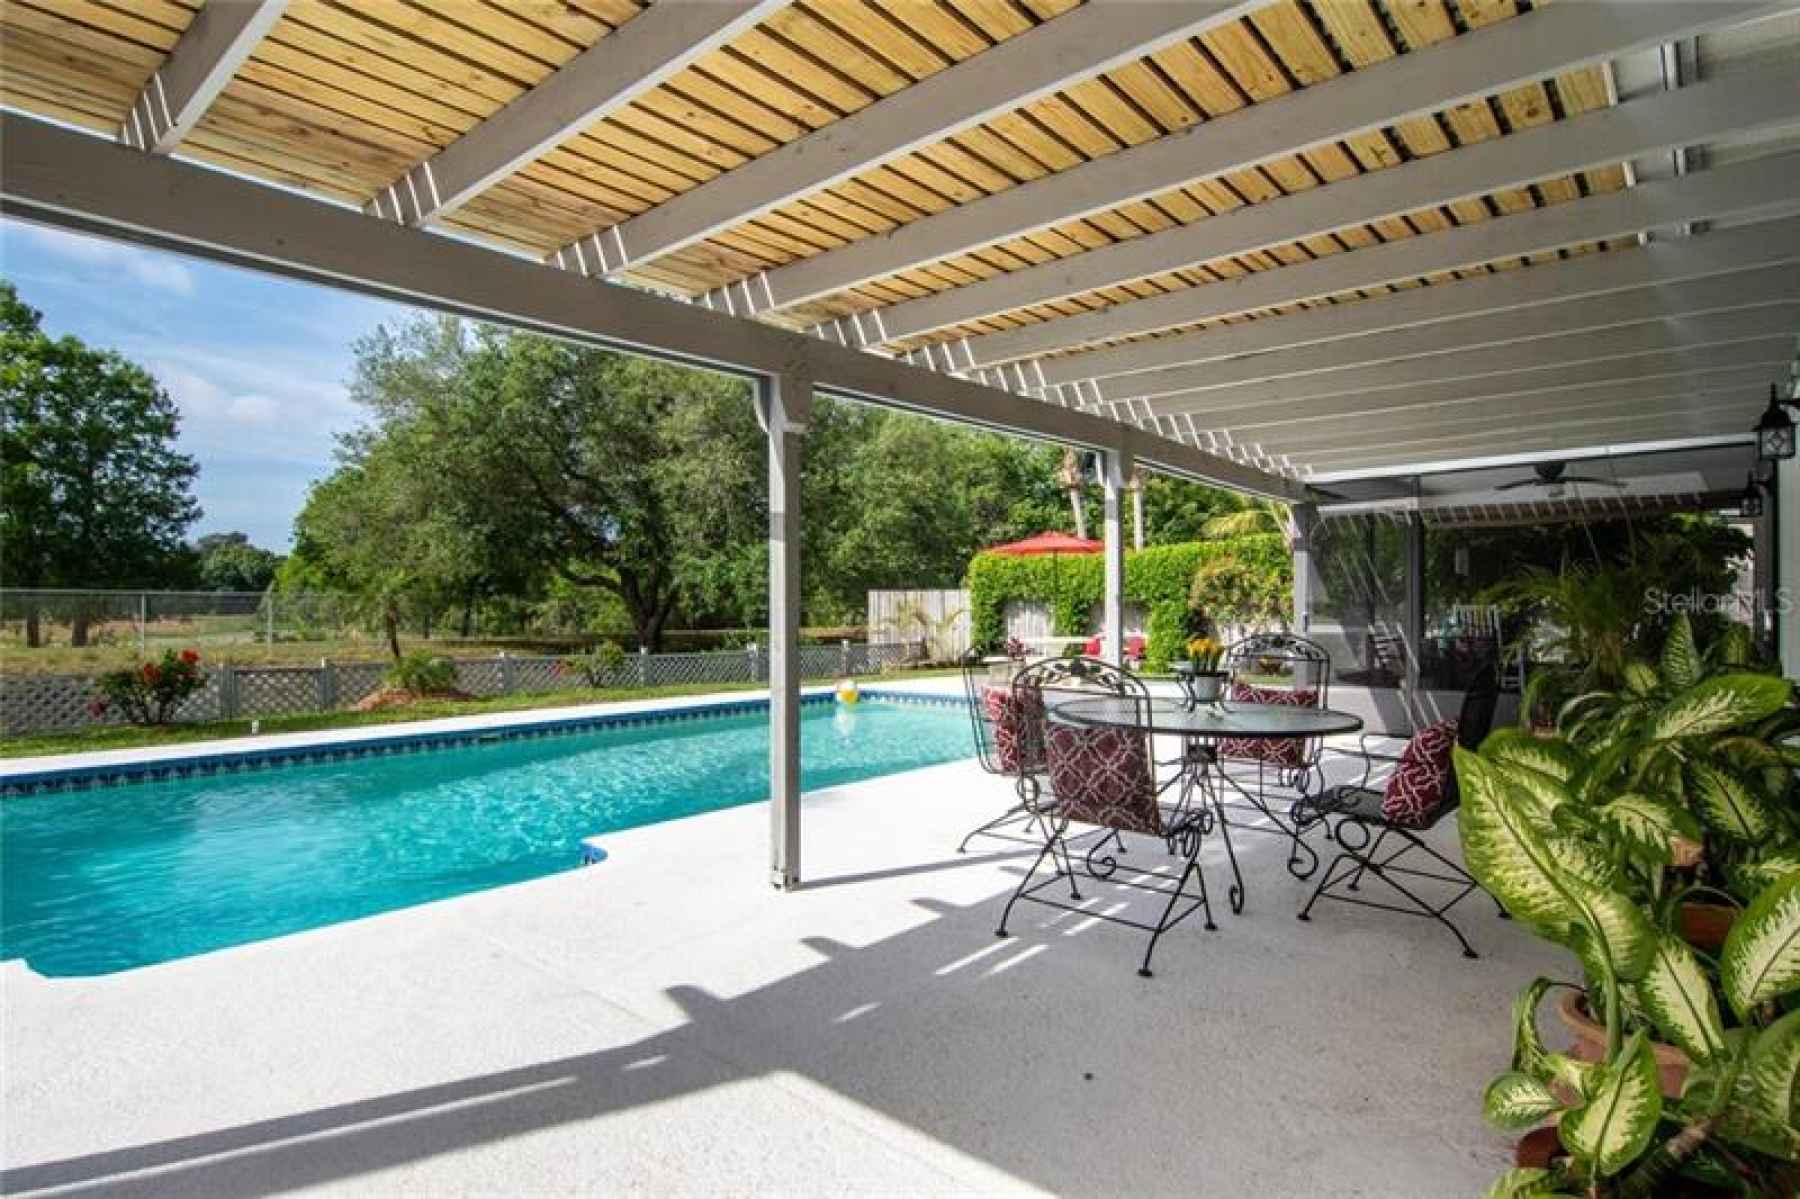 Covered entertaining patio